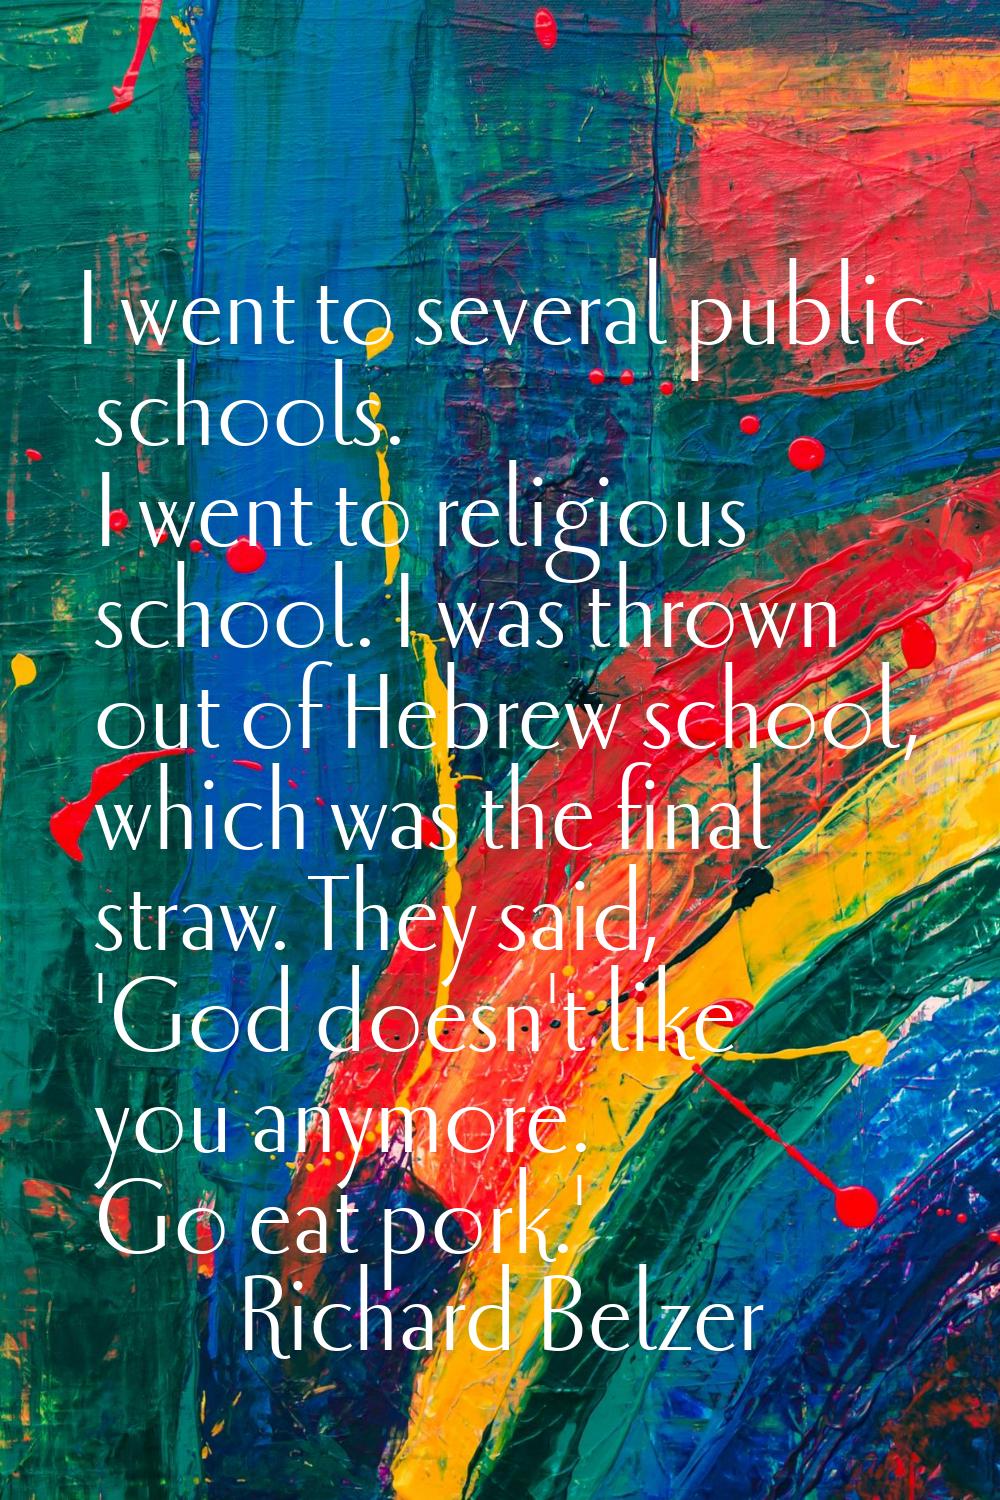 I went to several public schools. I went to religious school. I was thrown out of Hebrew school, wh